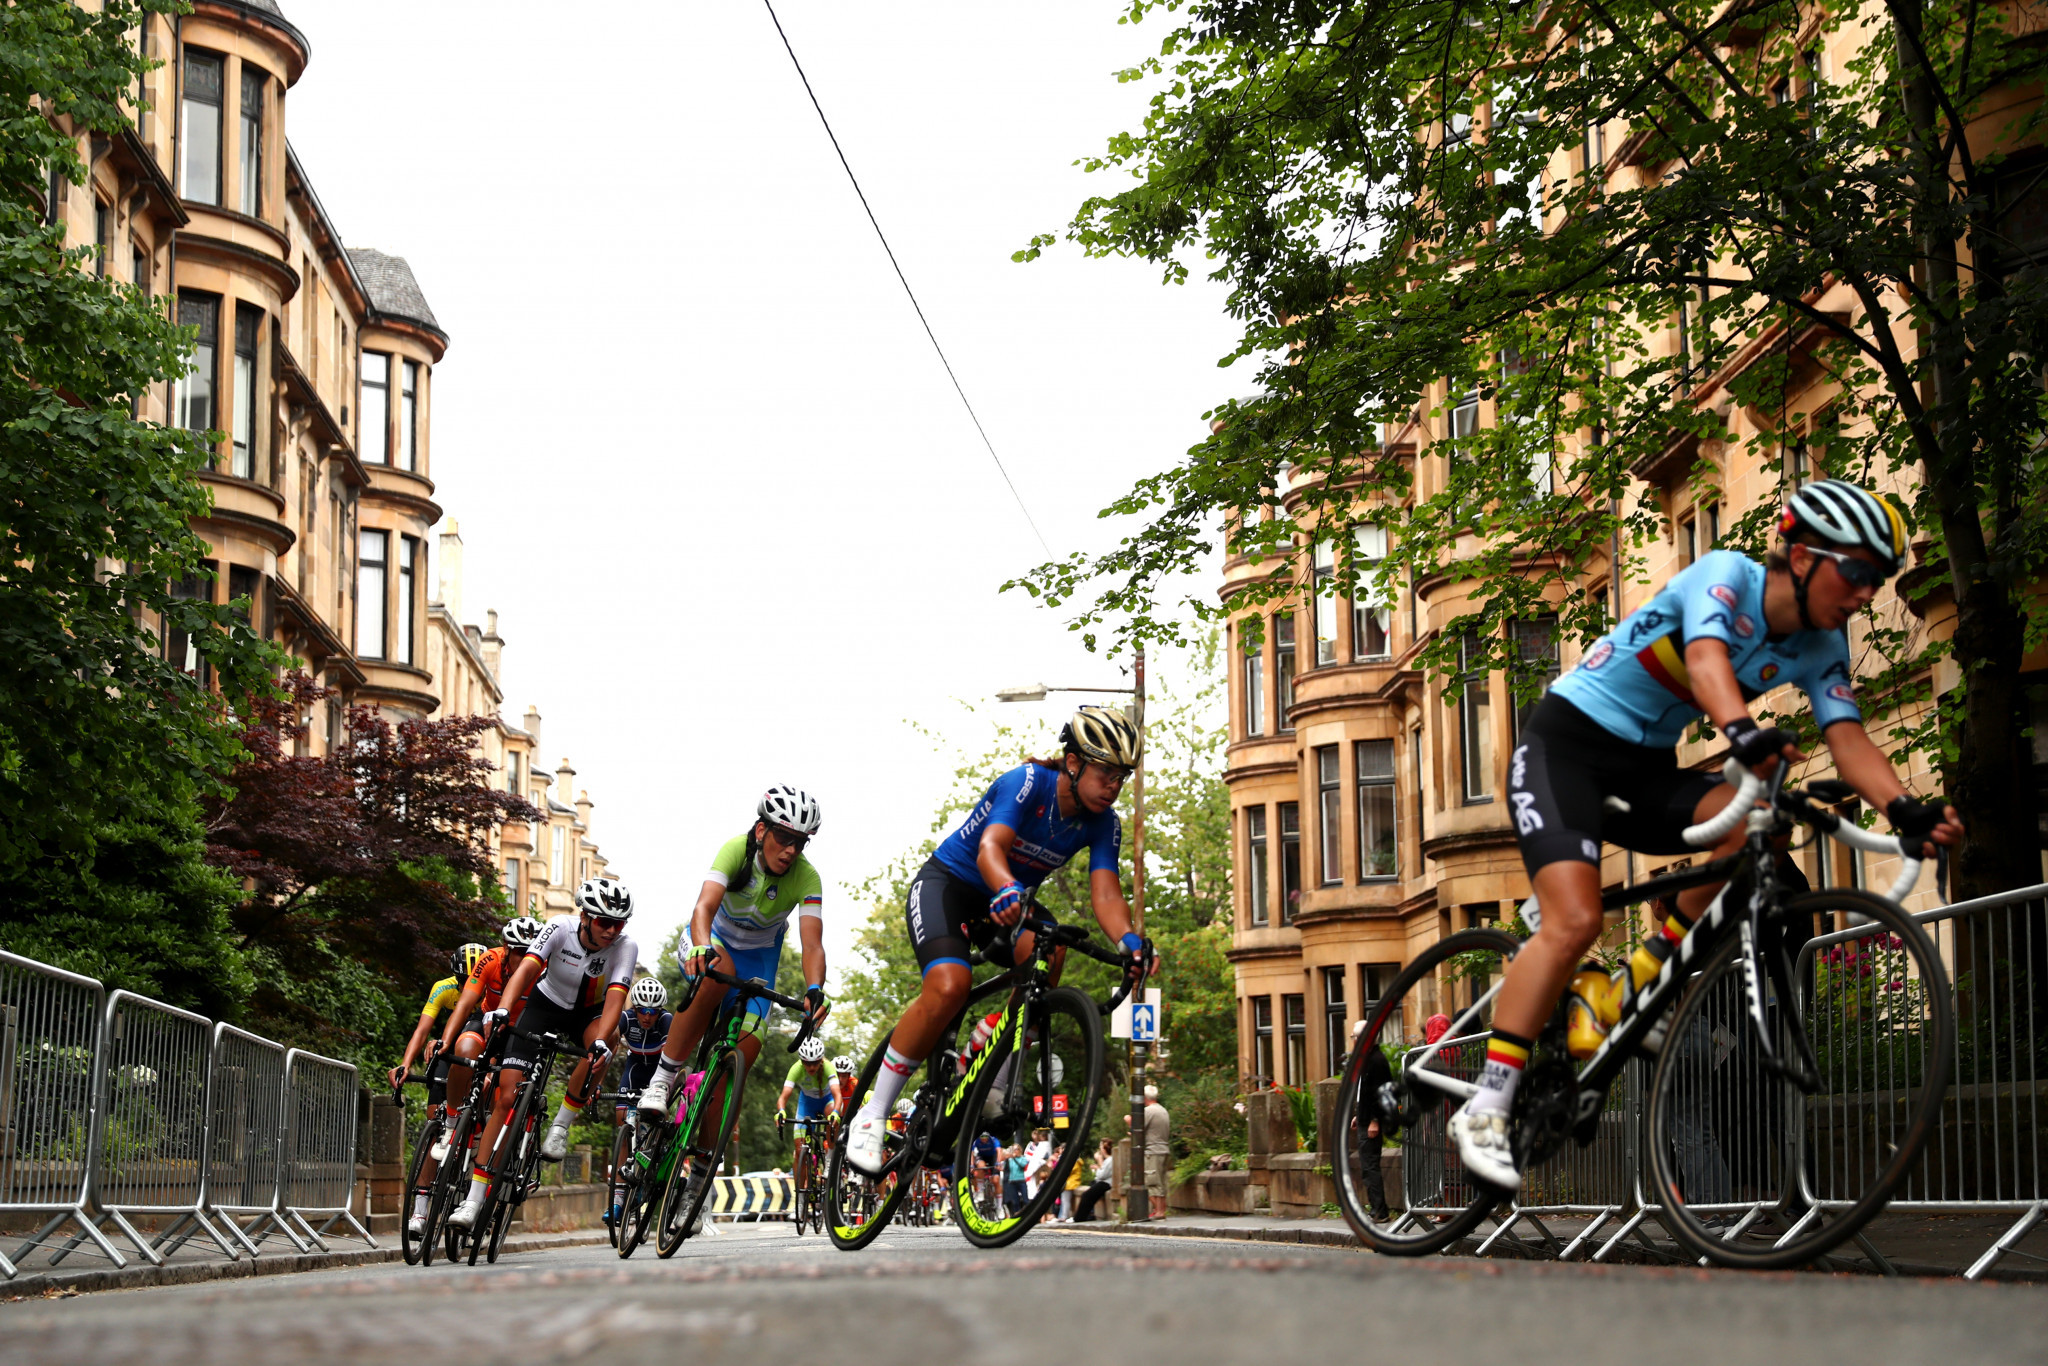 Glasgow city centre became the venue for the women's road race ©Getty Images